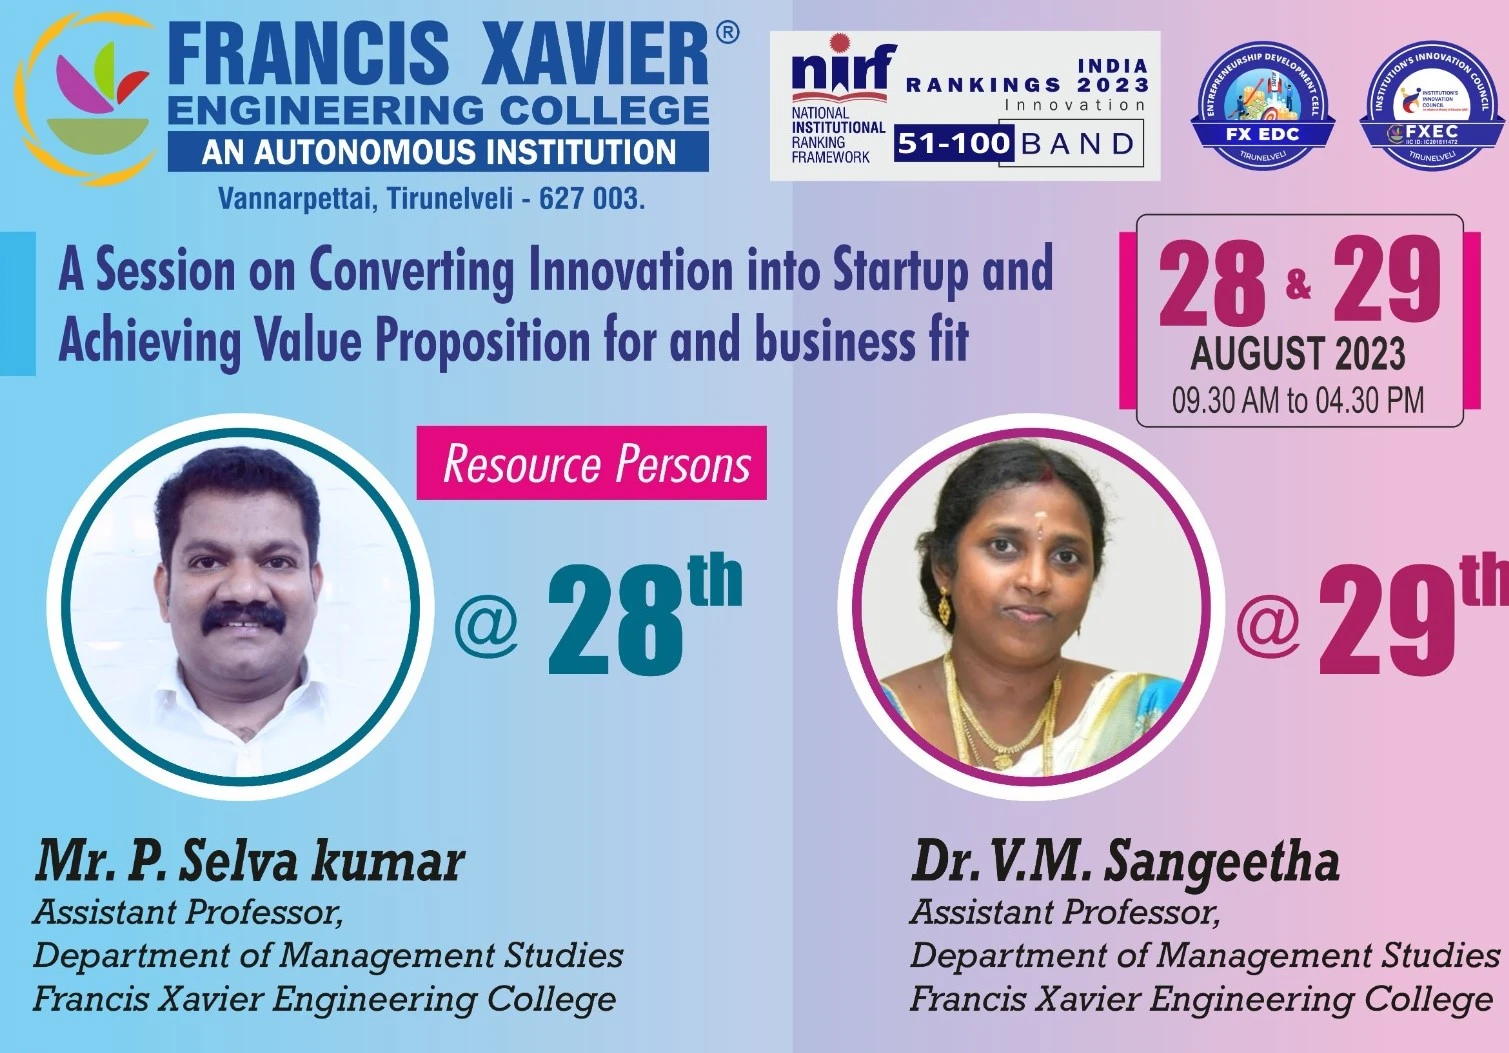 Converting Innovation into Startup and Achieving Value Proposition Fit and Business Fit”